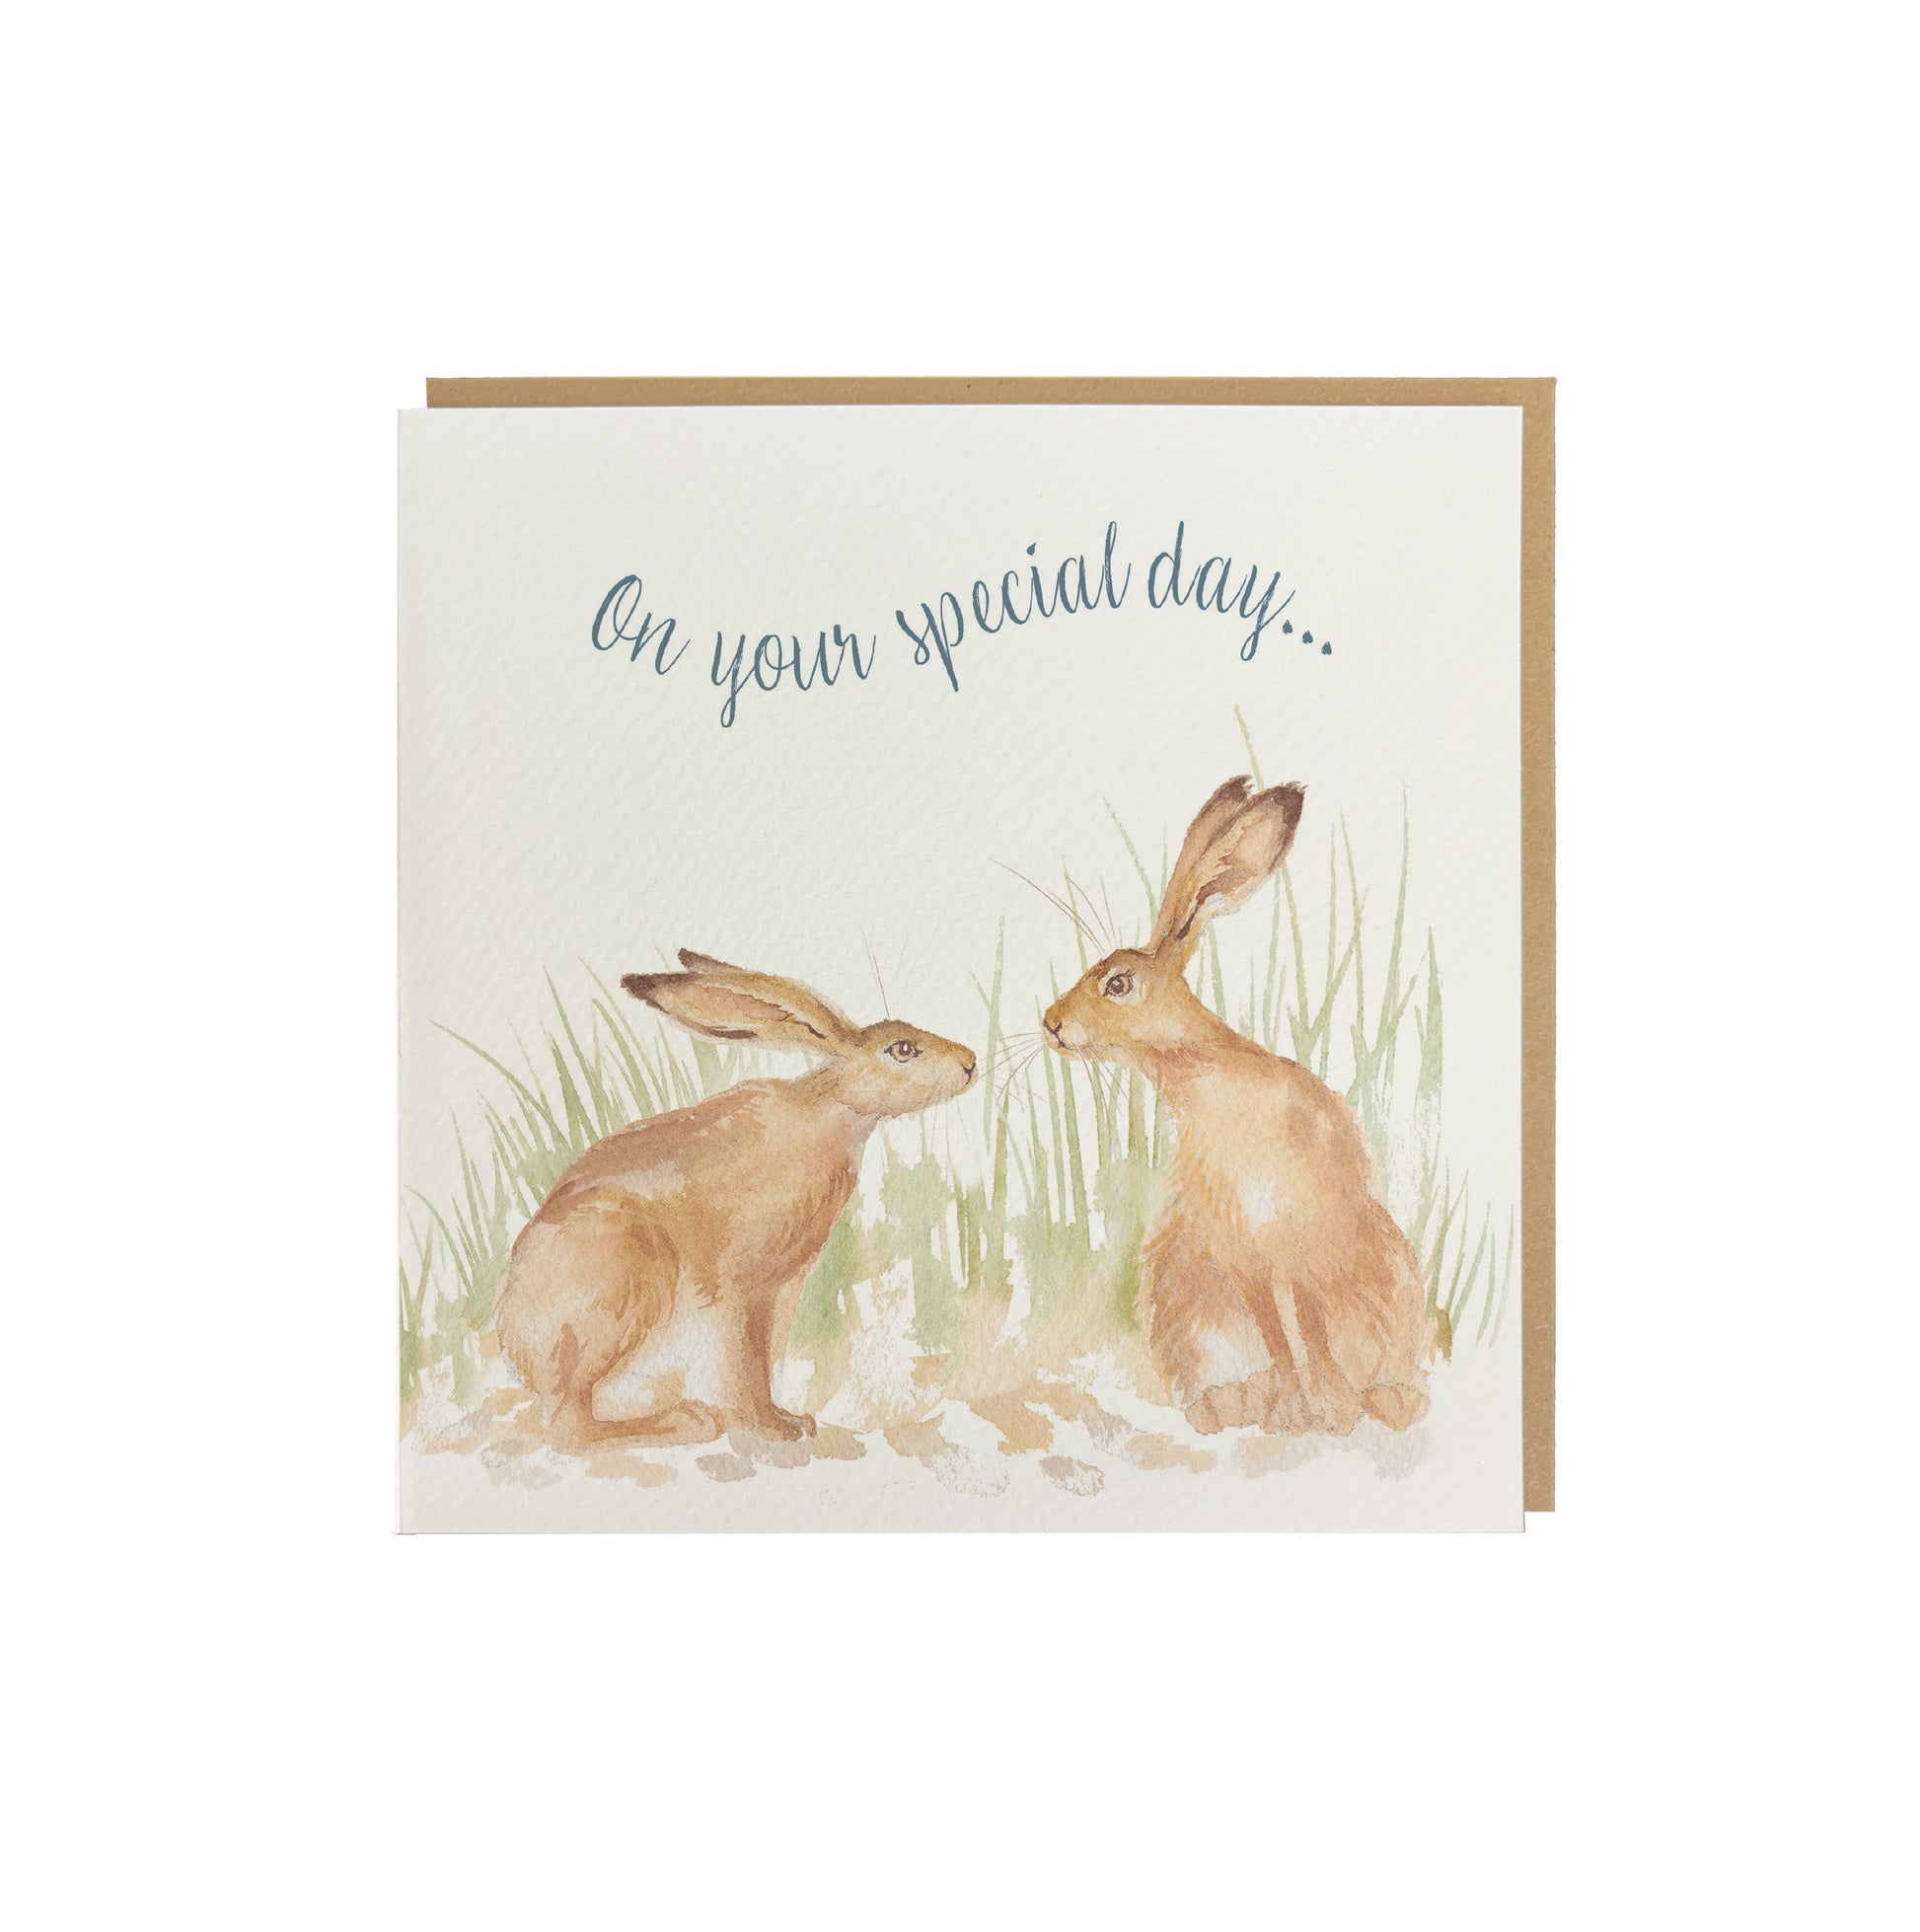 A greetings card reading On Your Special Day in dark blue text above a hare couple in a watercolour style. The card has a recyclable brown kraft envelope behind it.